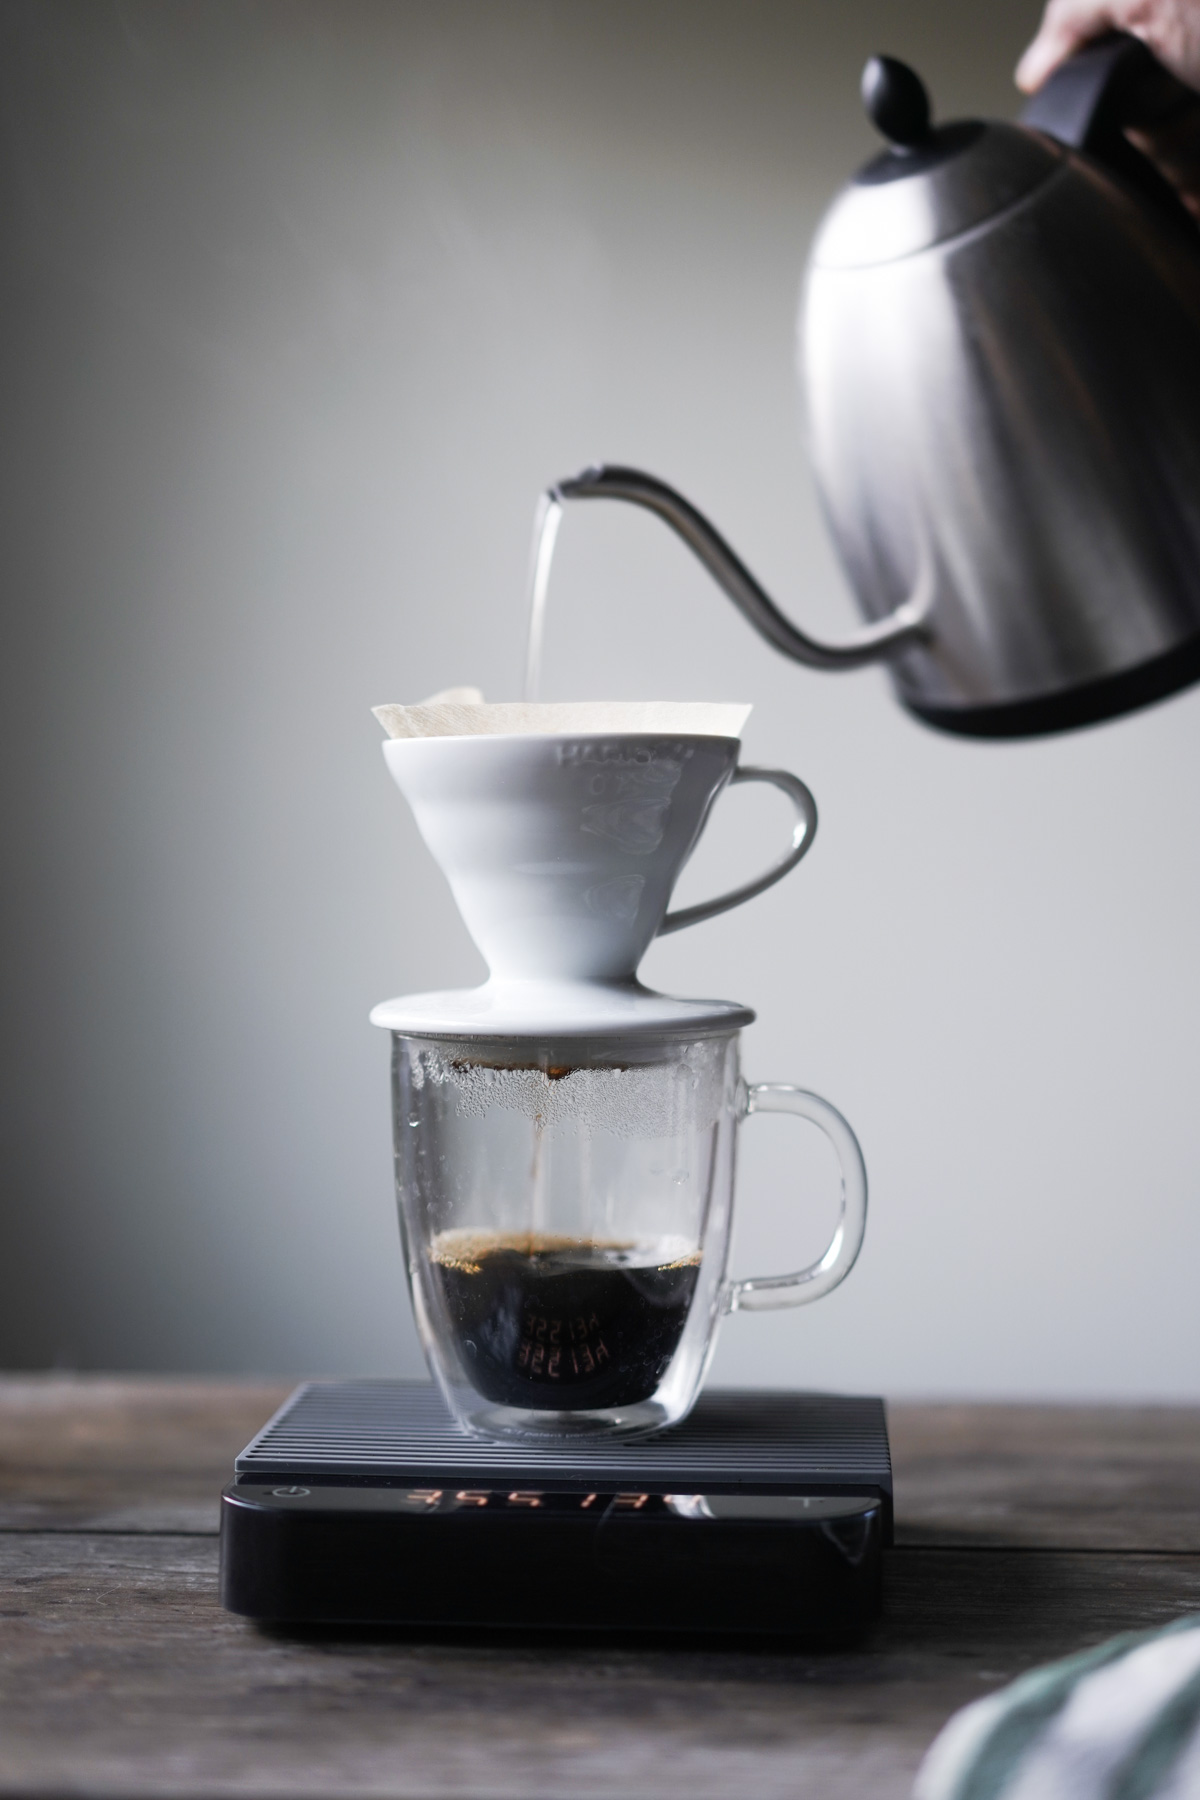 pour over with Hario V60 and Acaia scale